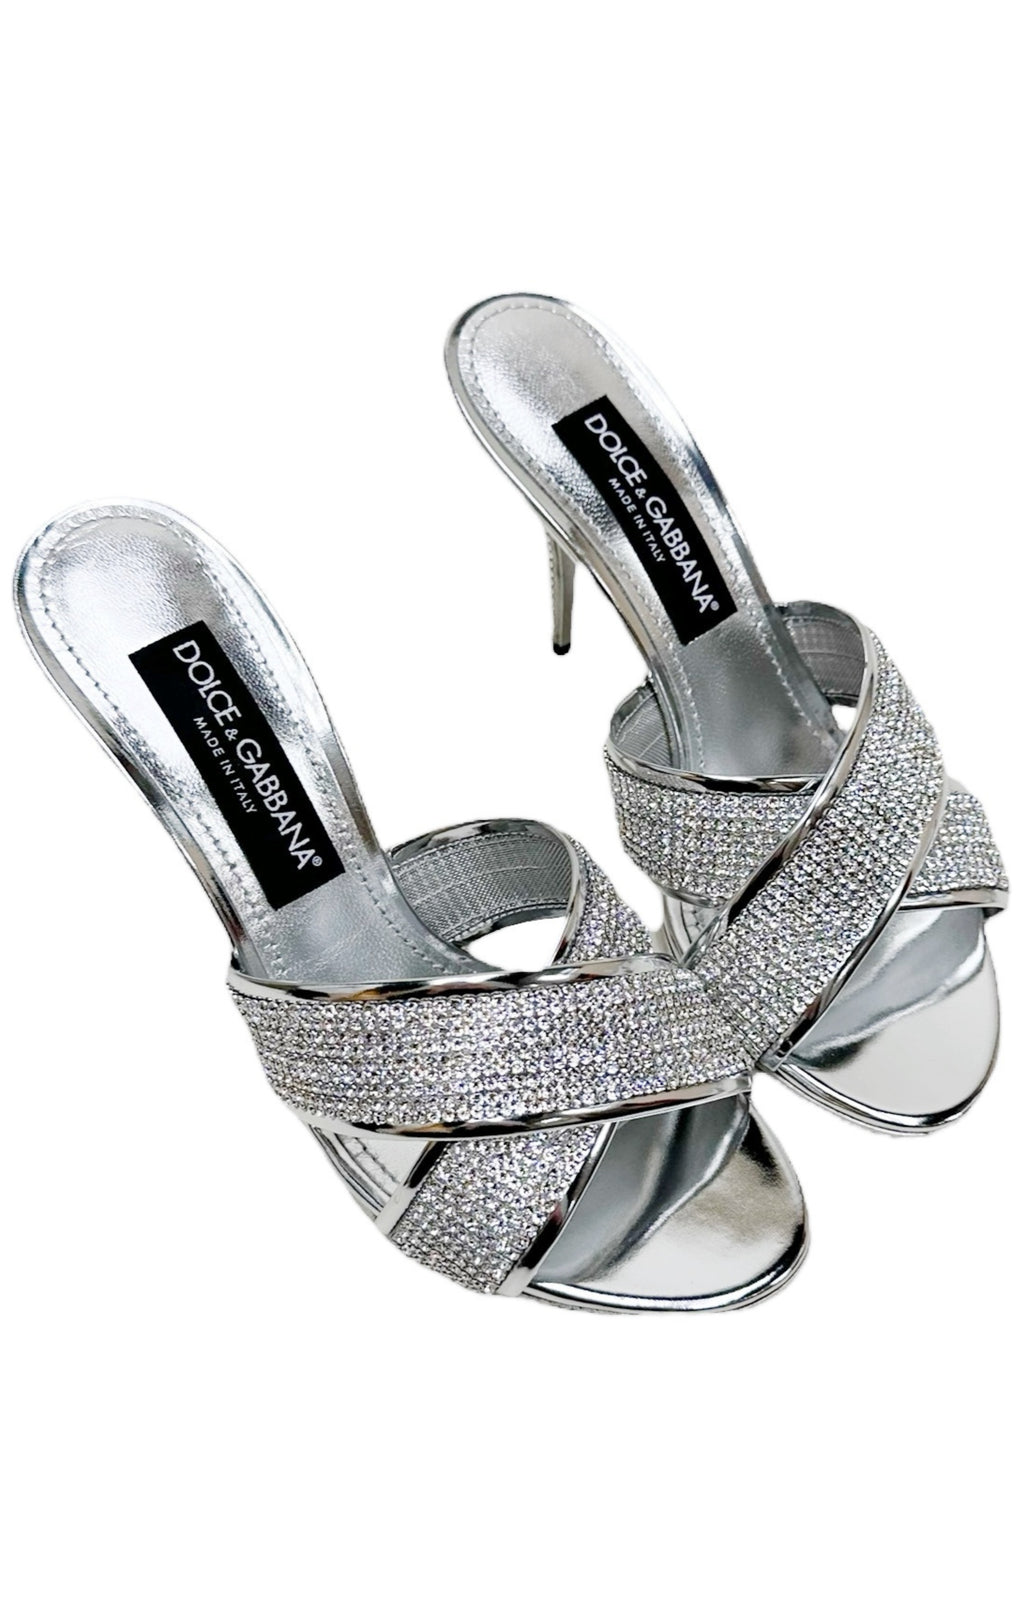 DOLCE & GABBANA (NEW) Sandals Size: EUR 39 / Fit like US 9